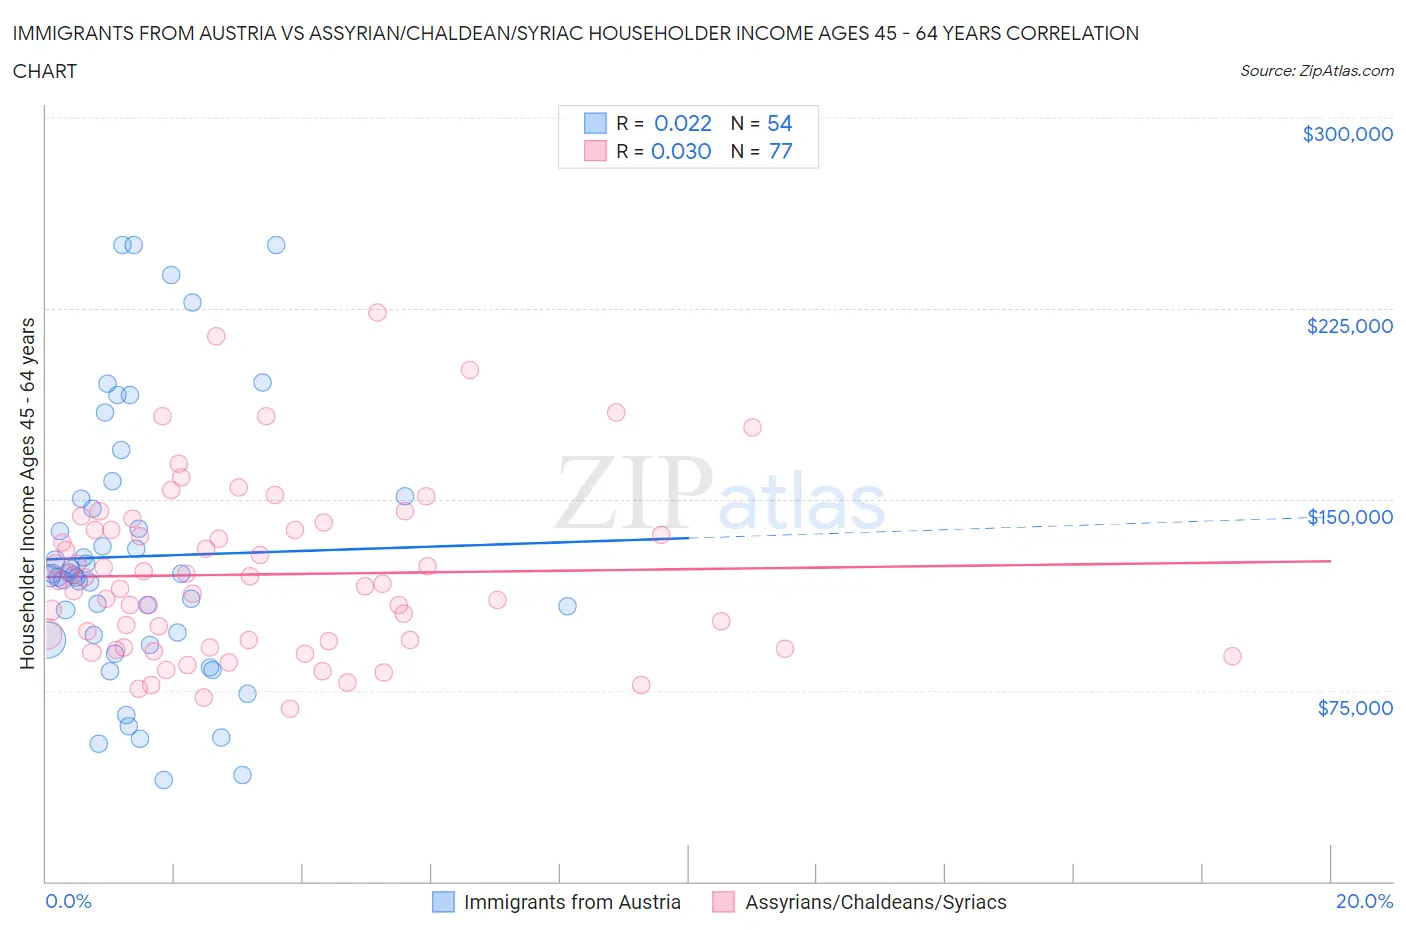 Immigrants from Austria vs Assyrian/Chaldean/Syriac Householder Income Ages 45 - 64 years